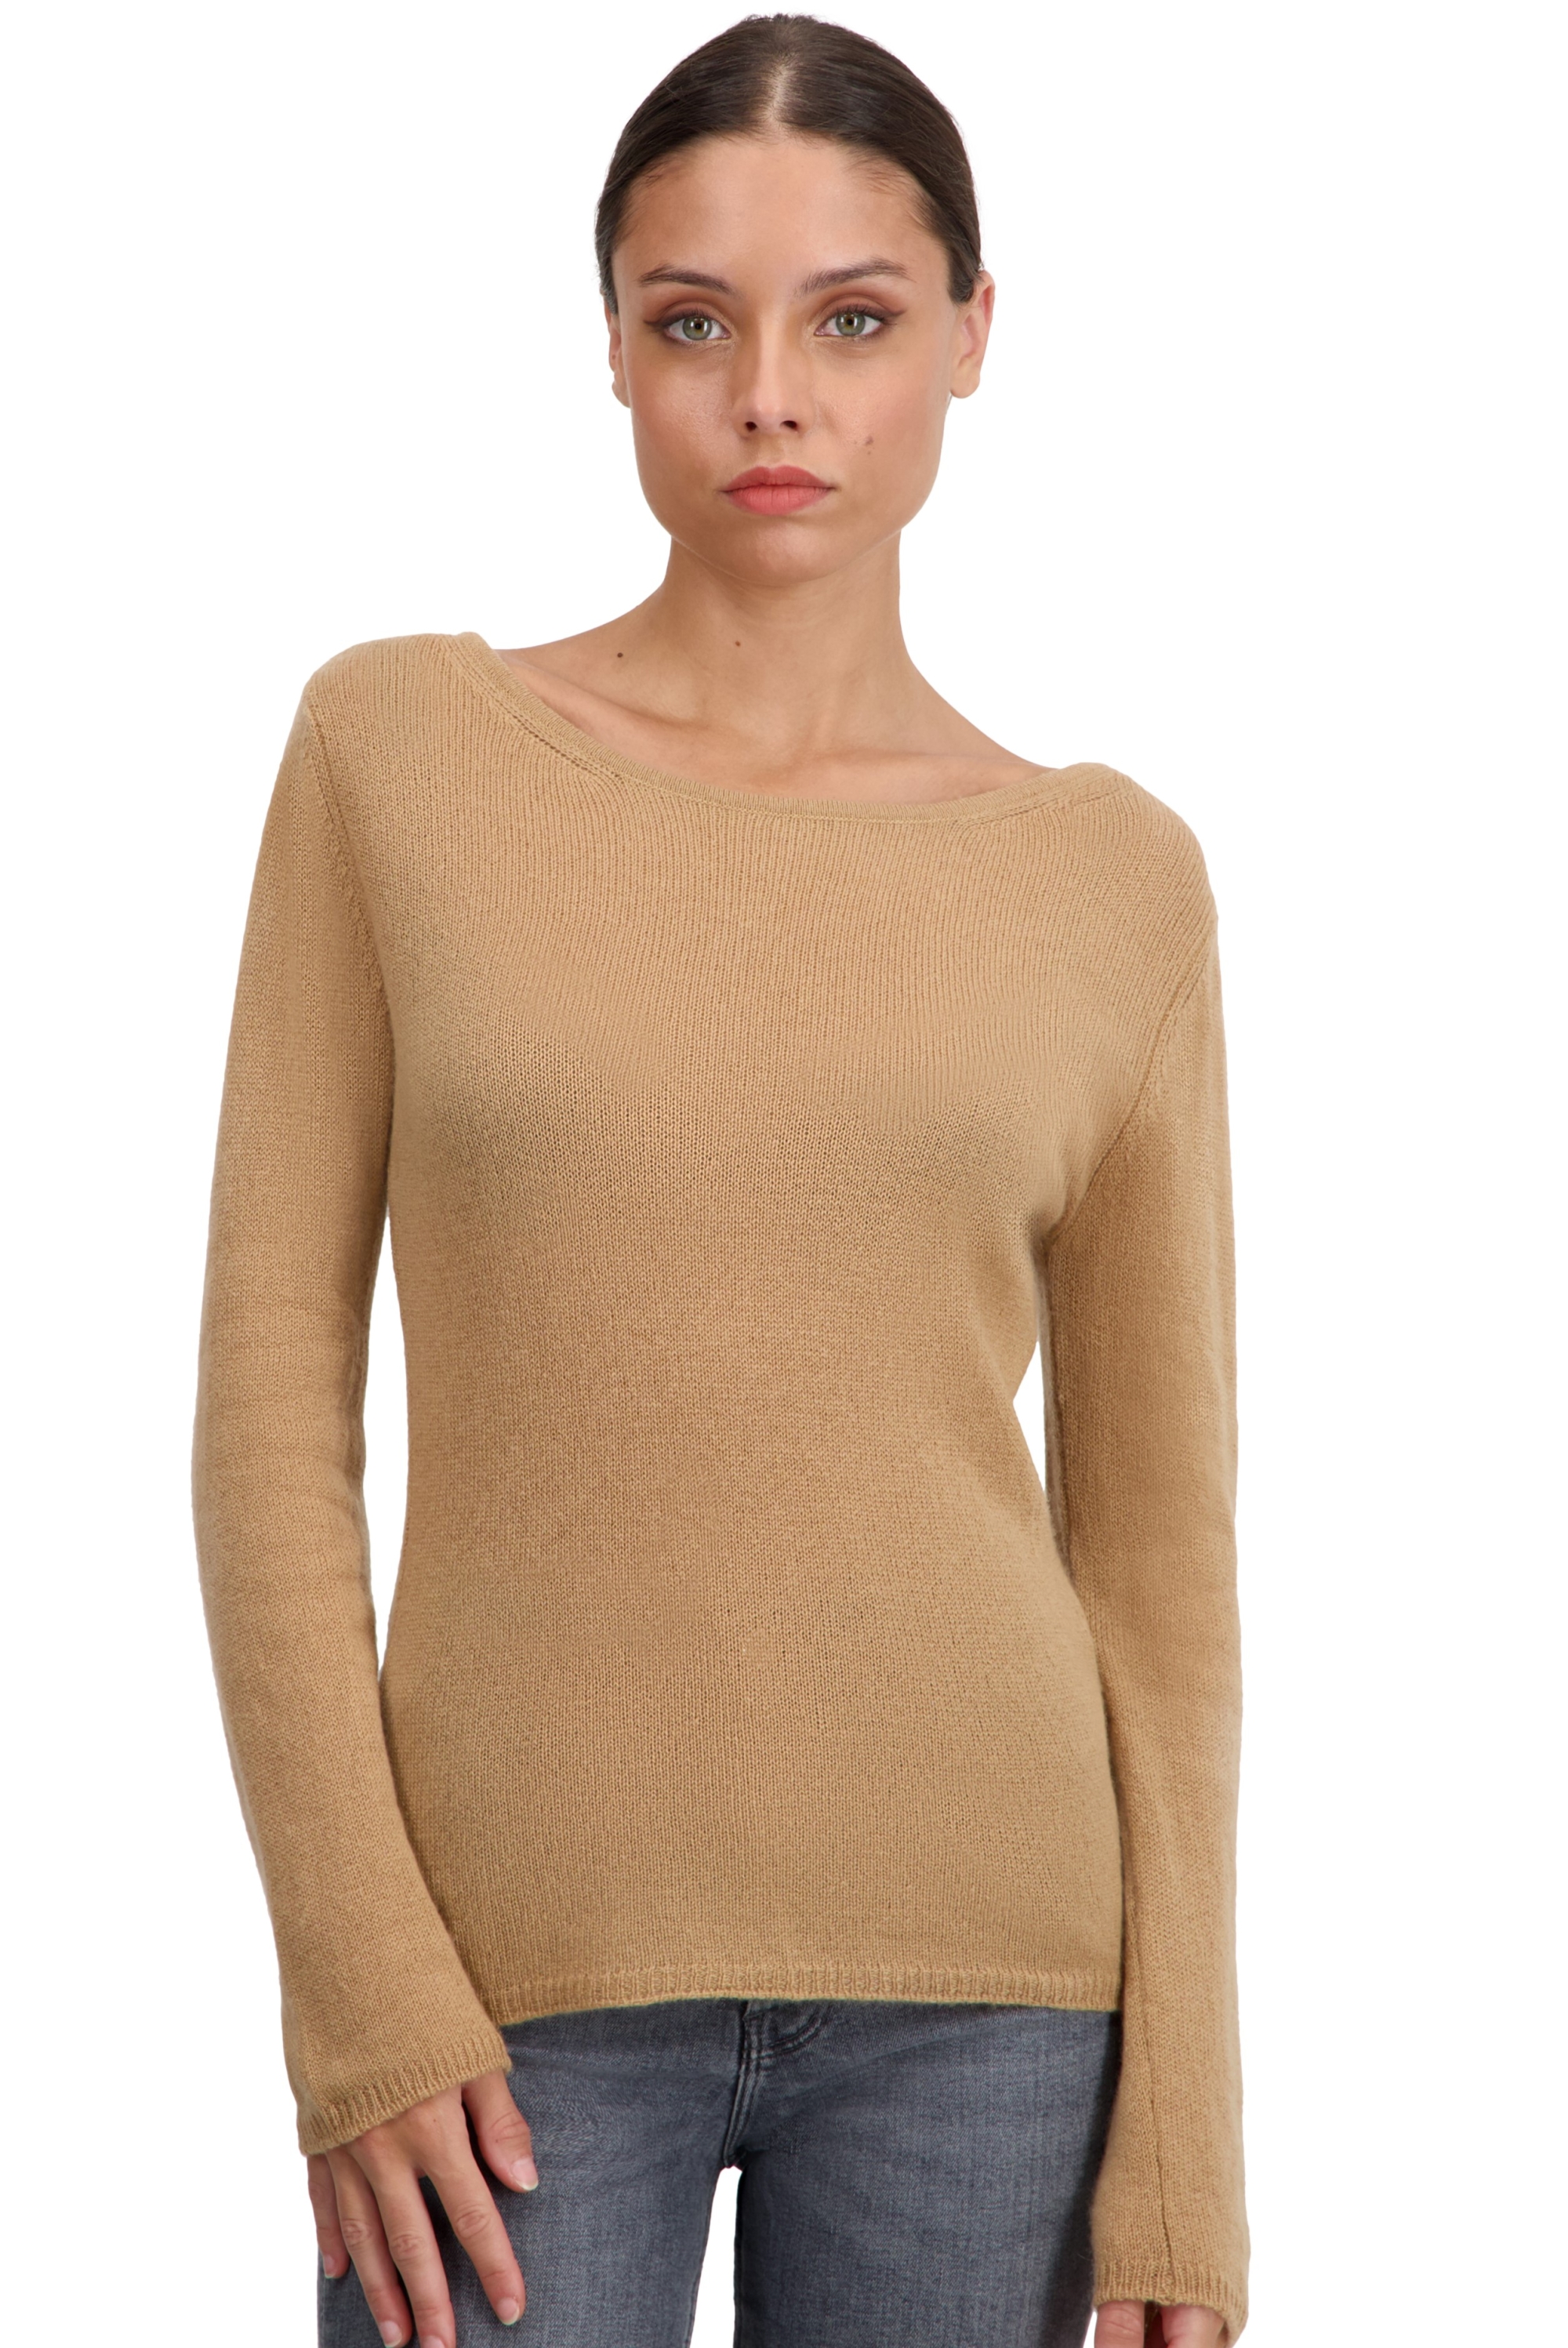 Cachemire pull femme collection printemps ete caleen camel m